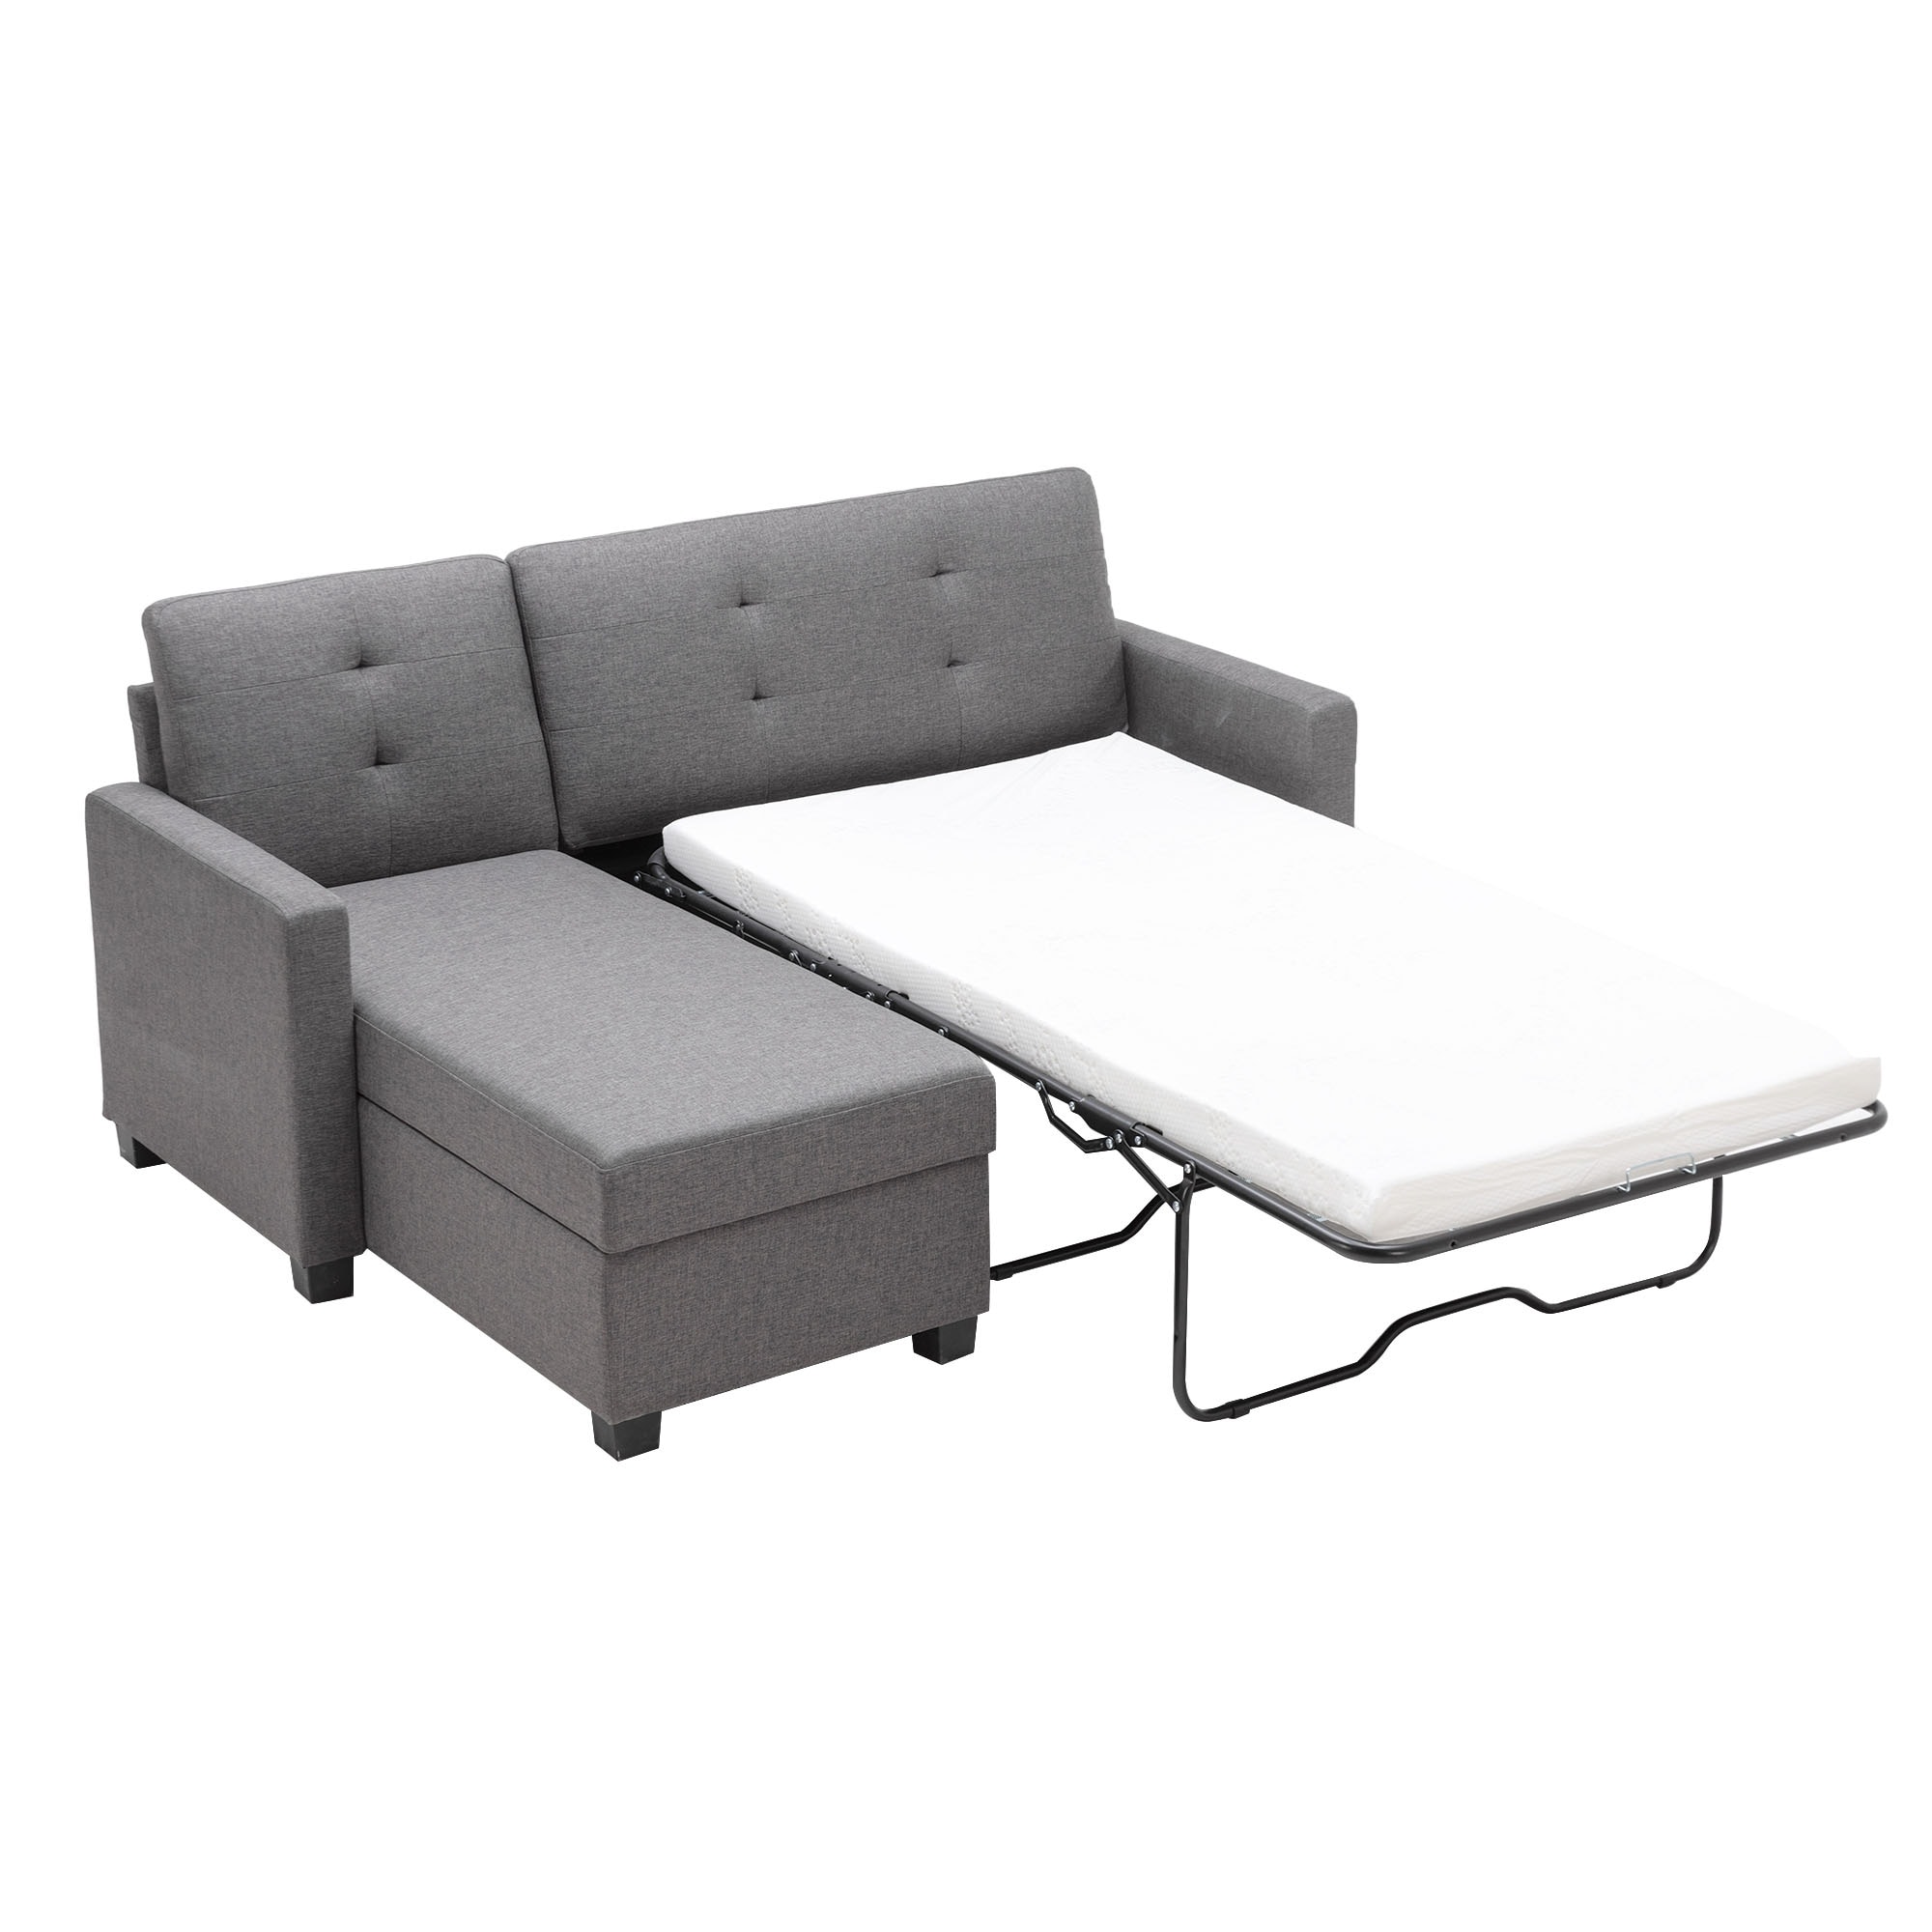 78.3 Convertible Sleeper Sofa Bed linen Pull Out Couch With Storage Chaise sleeper Counch With Memory Foam Mattress